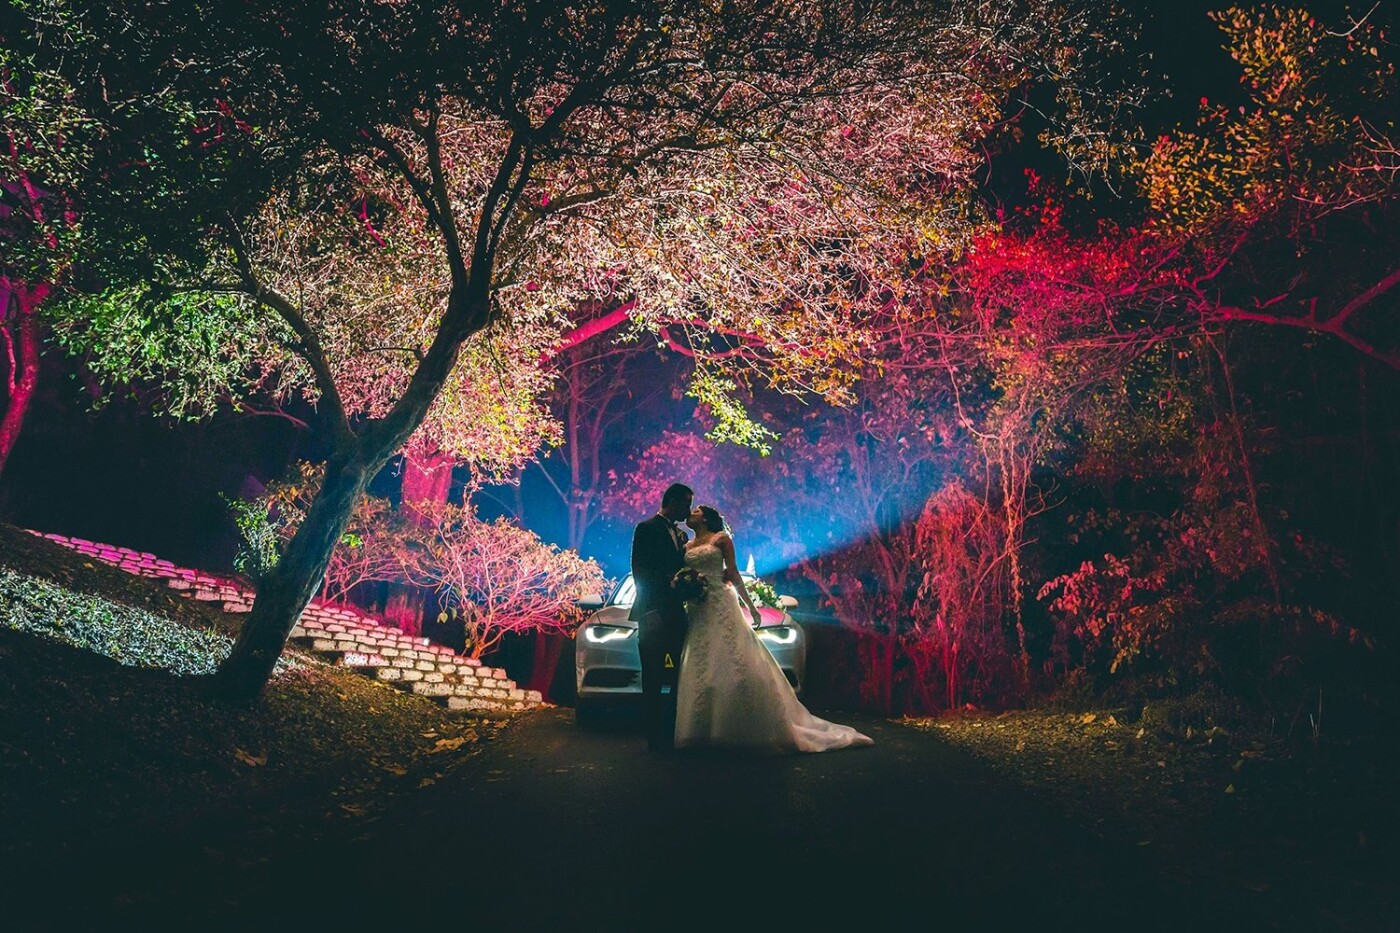 We were done with the couple shoot of Charlston & Fomina and were headed back to their car to head to the reception, When i thought it would be great to try out a shot with the Audi in the background, using its lights and my flash triggered from behind. What we did not expect was the rear brae lights of the car to create these crazy colors on the trees behind the car, which formed such a beautiful colorful pic.<br />
Turned out to be very magical as the couple shared an intimate moment.